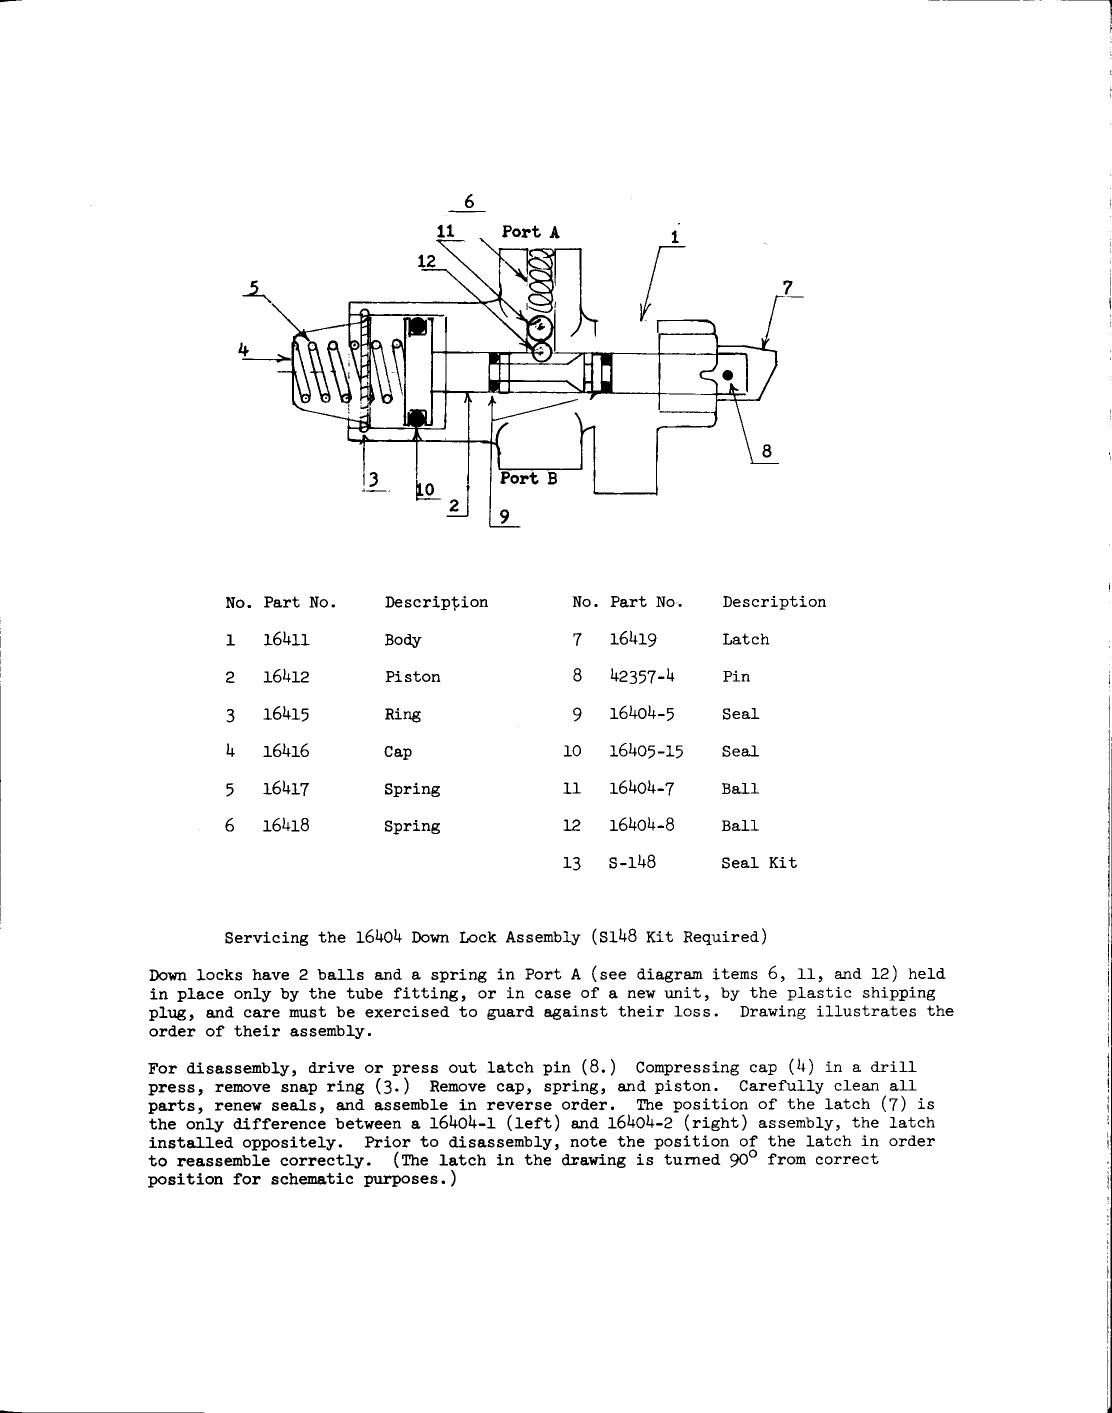 Sample page 5 from AirCorps Library document: The Swift Hydraulic Manual